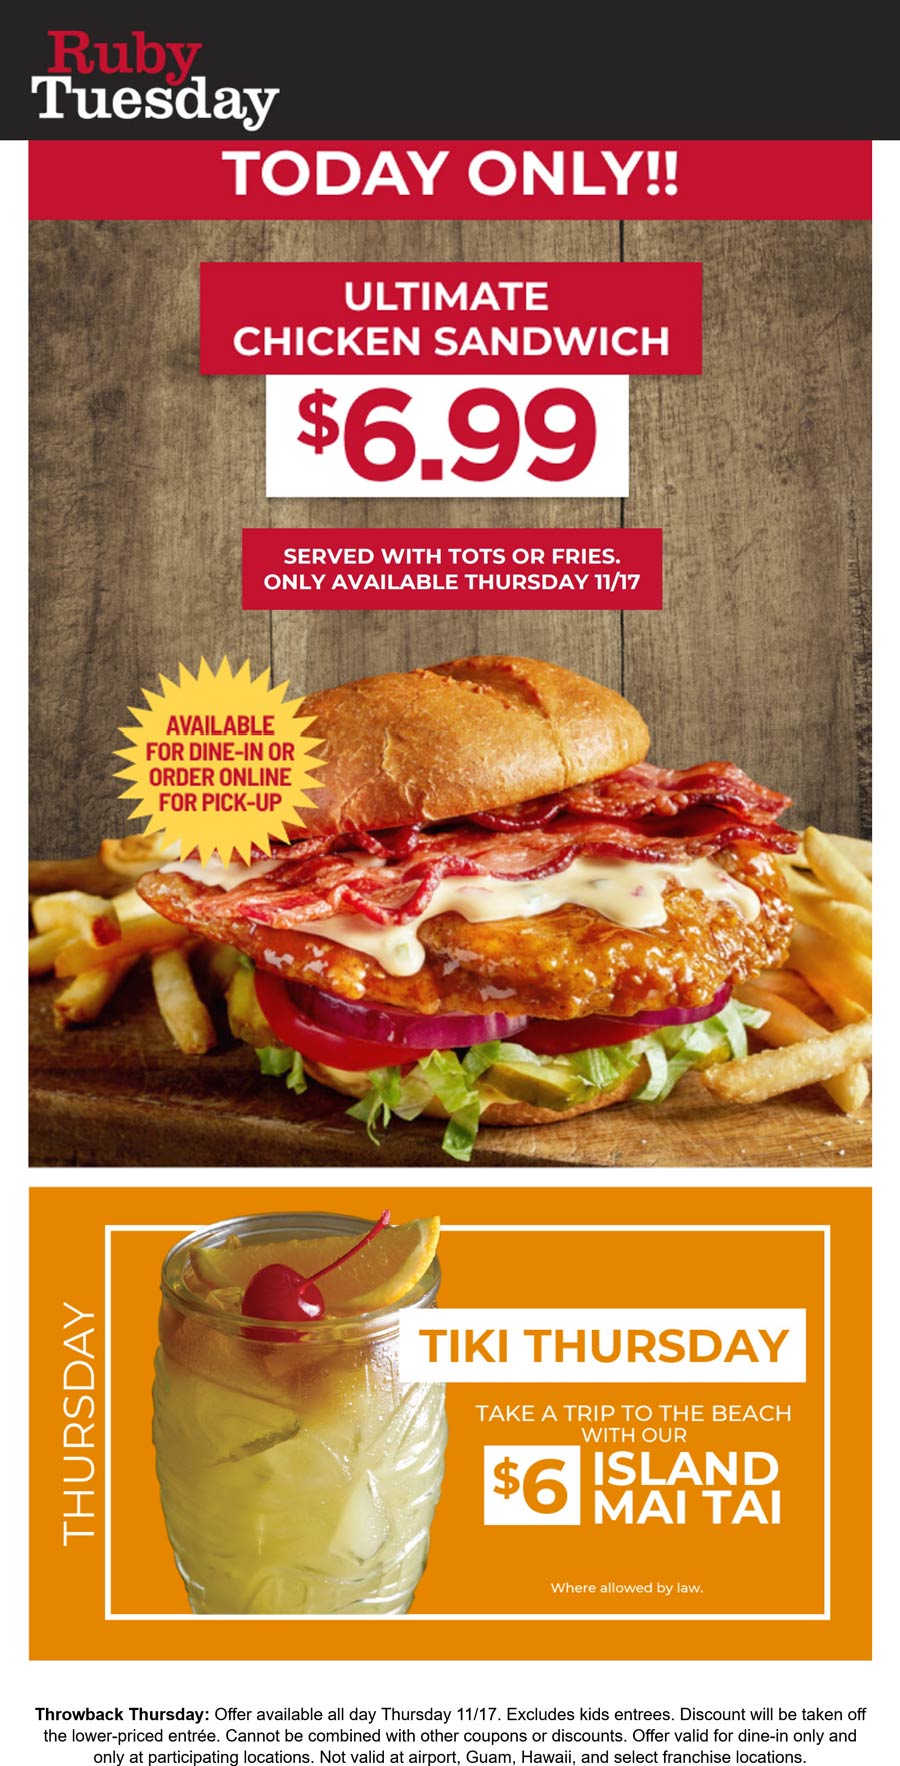 Ruby Tuesday restaurants Coupon  Ultimate chicken sandwich + fries = $7 today at Ruby Tuesday #rubytuesday 